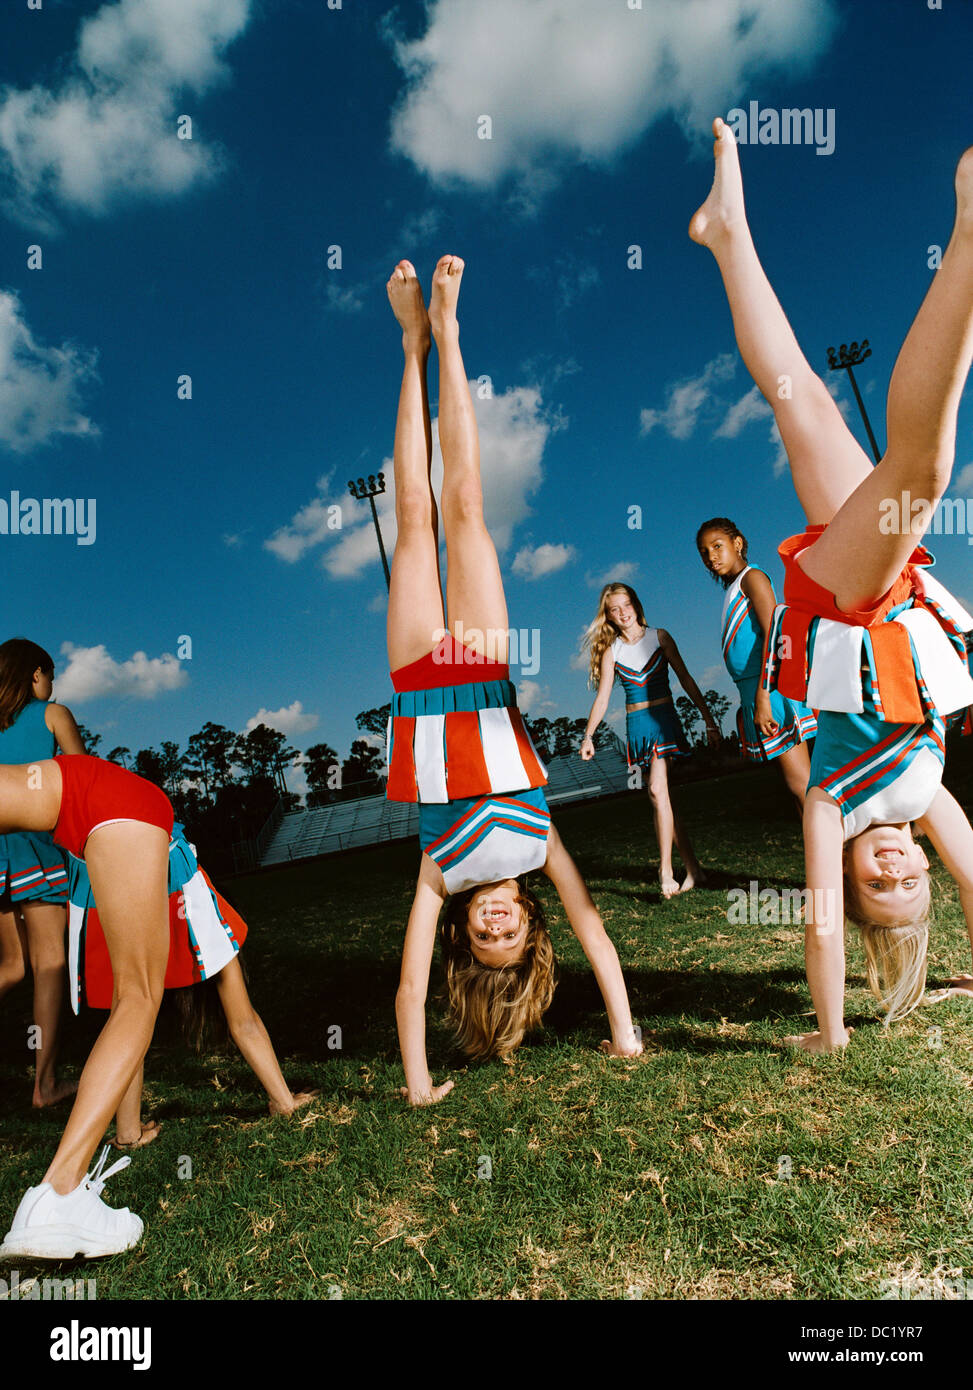 Cheerleaders performing handstands on pitch Stock Photo